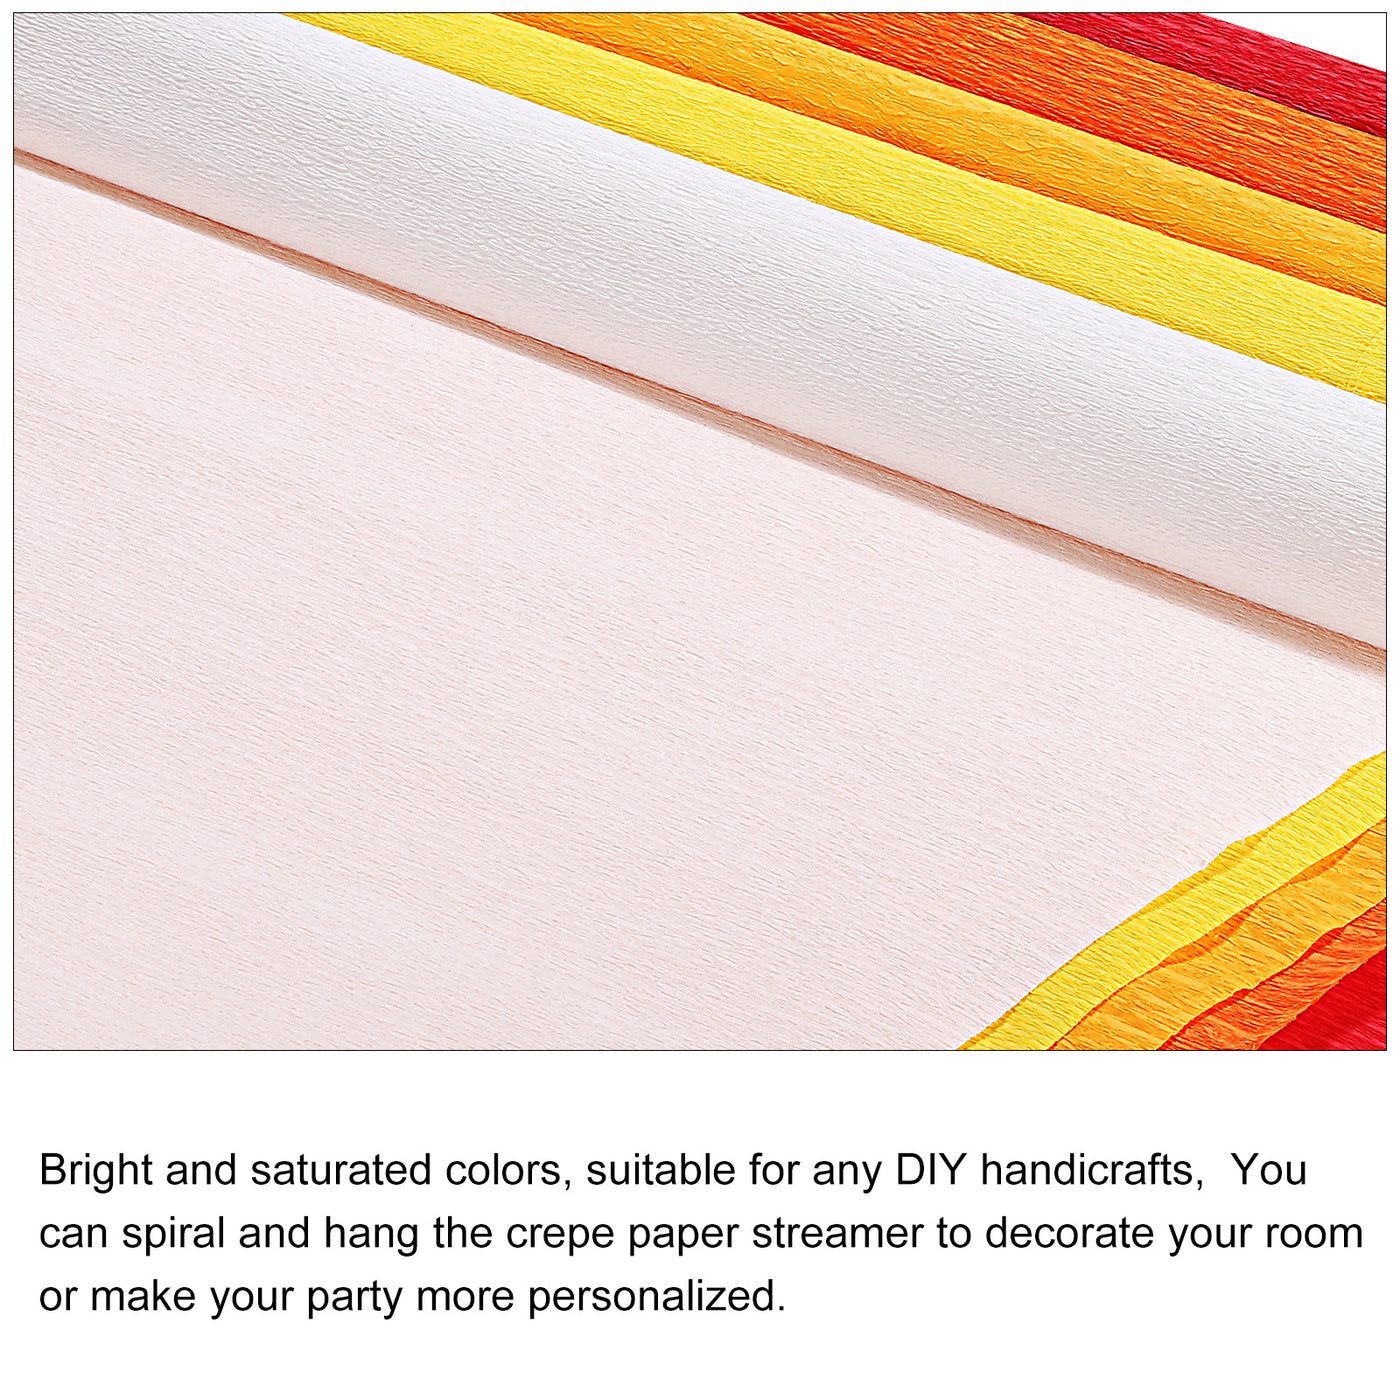 Harfington Crepe Paper Streamers 10 Rolls 7.5ft in 5 Colors for Party Decorations(Red,Orange,White,Yellow,Apricot Color)